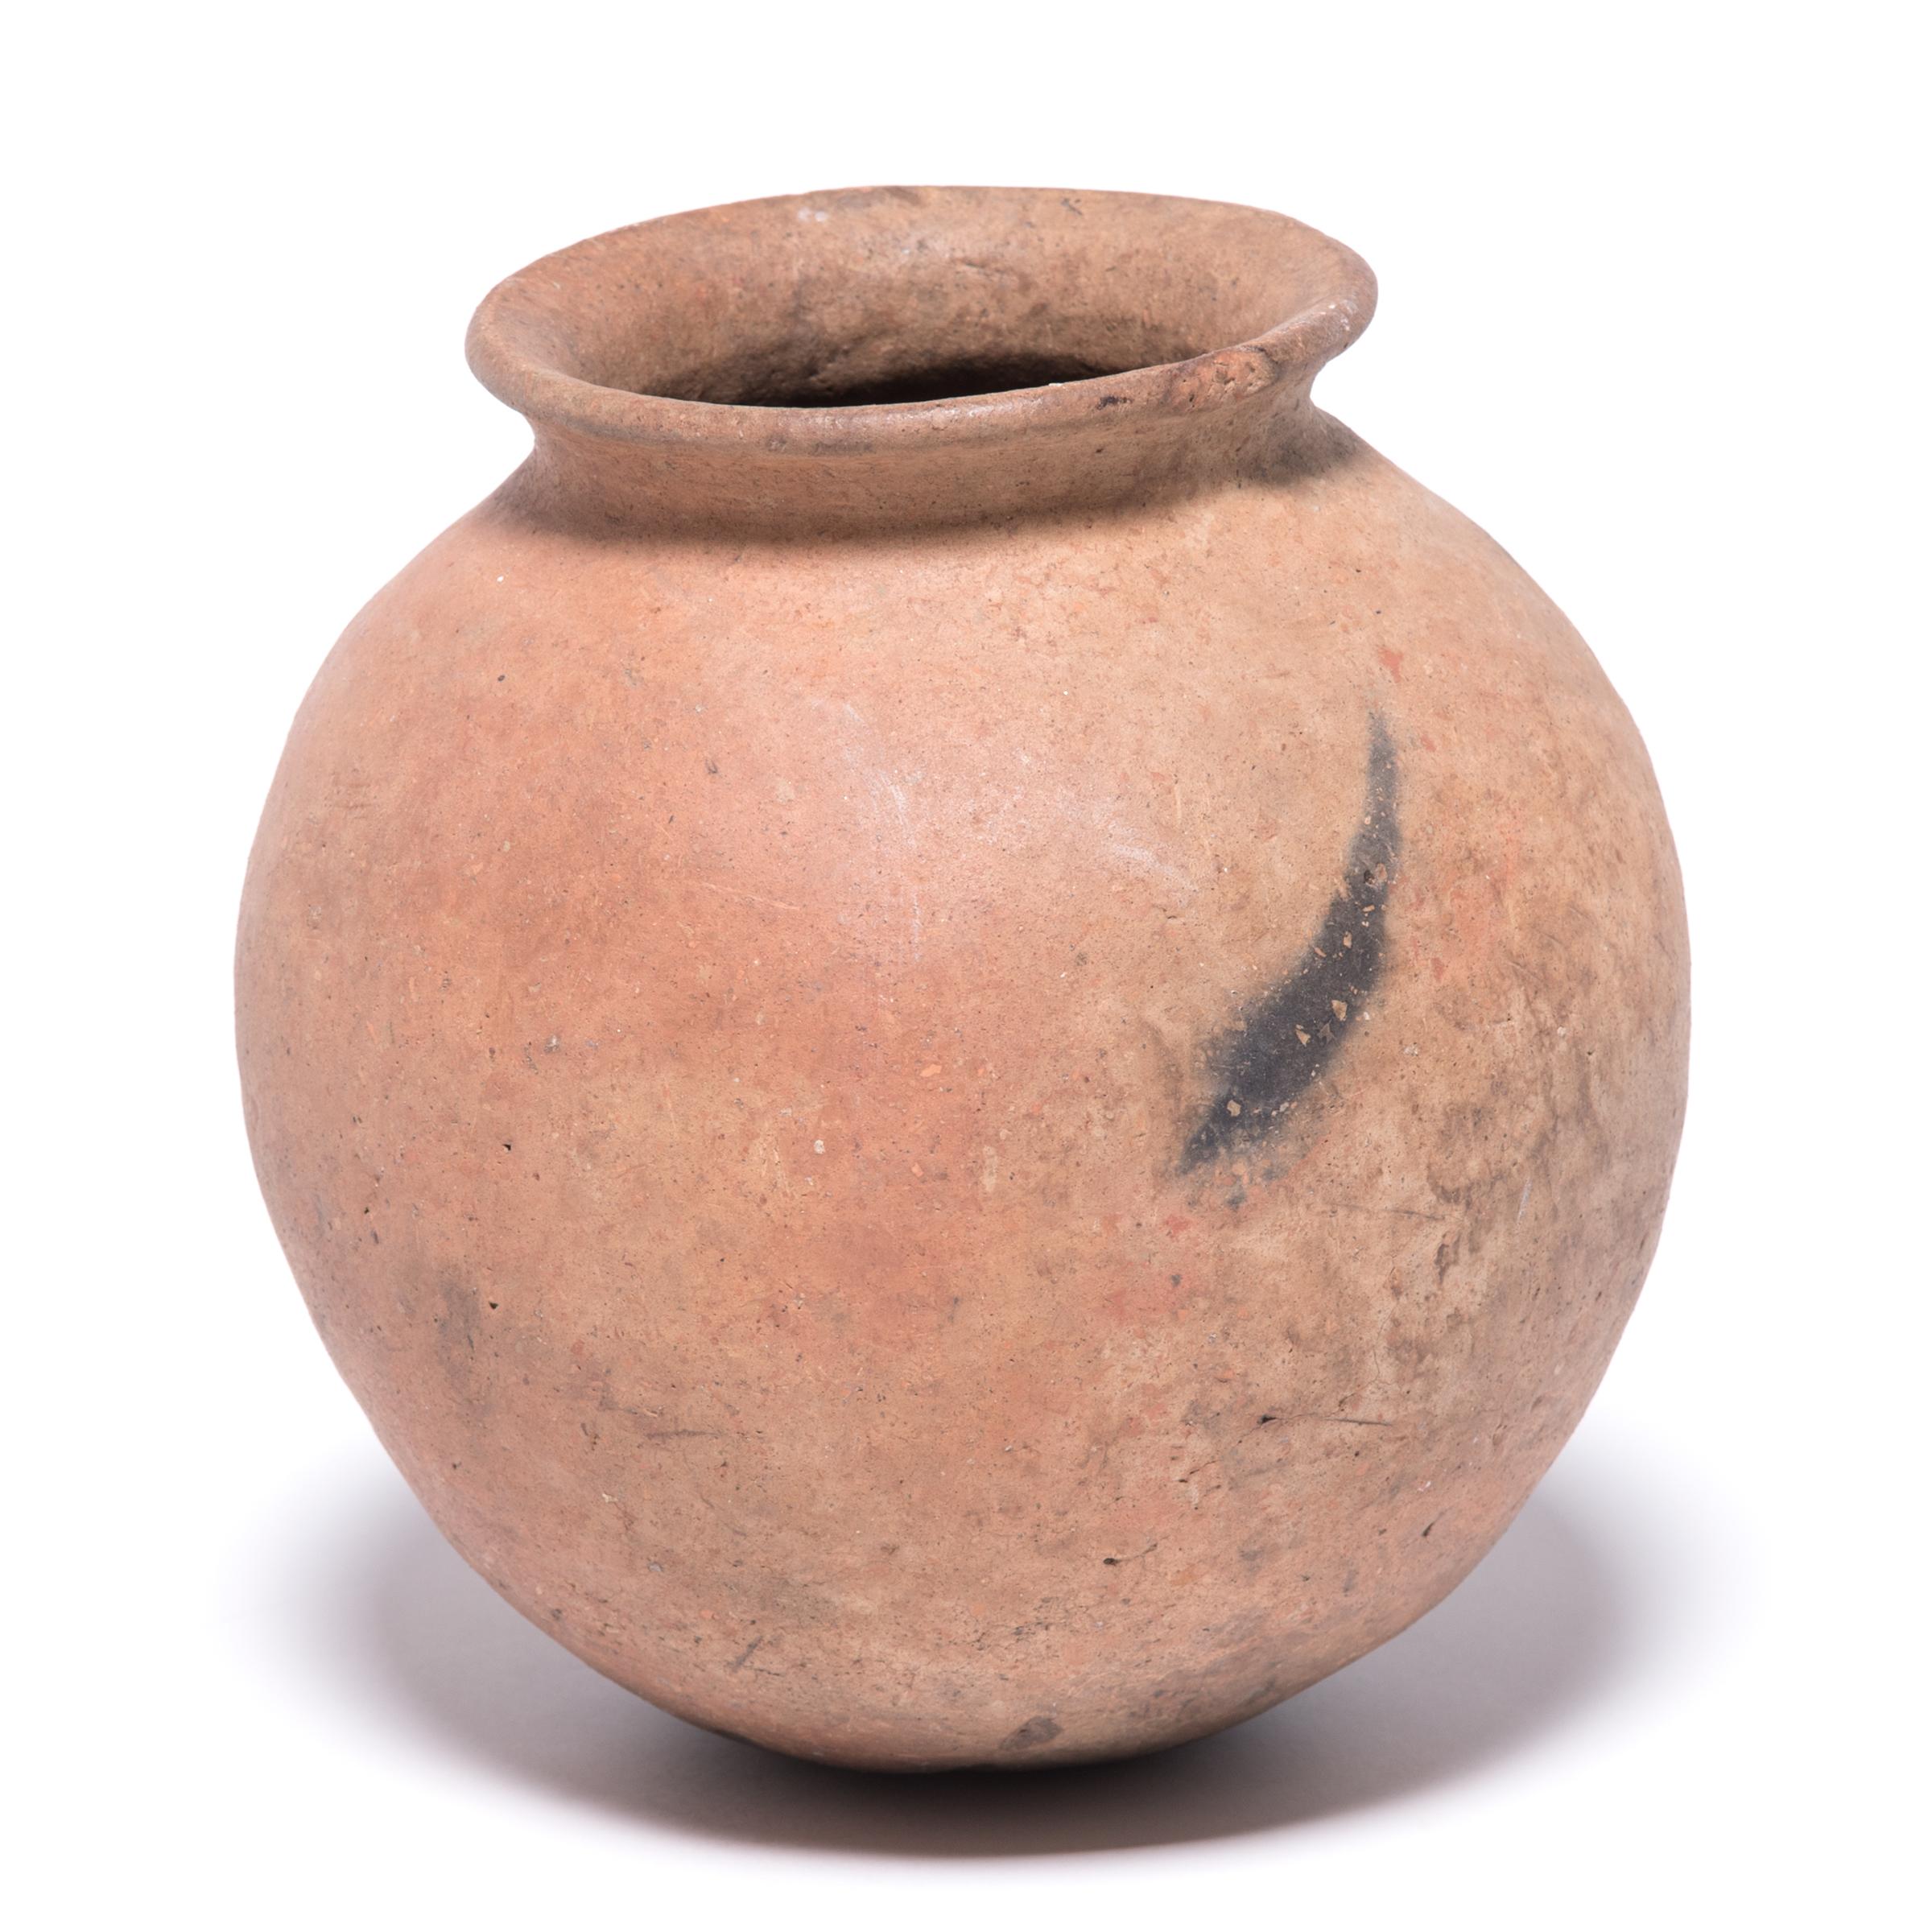 The Nupe people of Nigeria were touted as some of the finest ceramicists in Africa. Everyday objects, like this water vessel, received detailed attention. The vessel's varied textures come from its utilitarian design. The ceramicist left this vessel